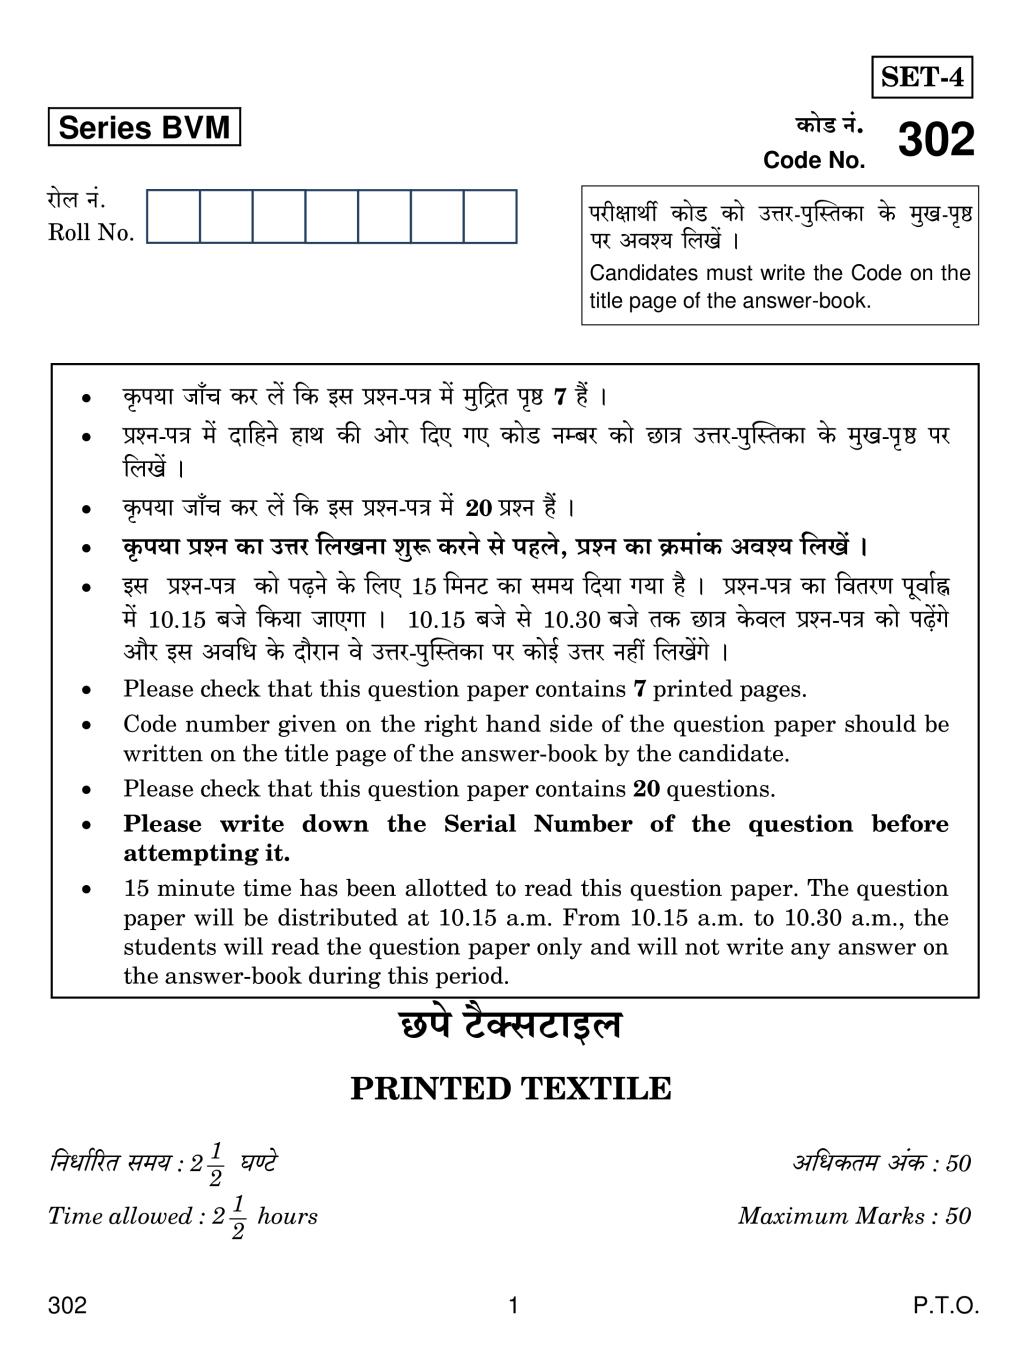 CBSE Class 12 Printed Textile Question Paper 2019 - Page 1